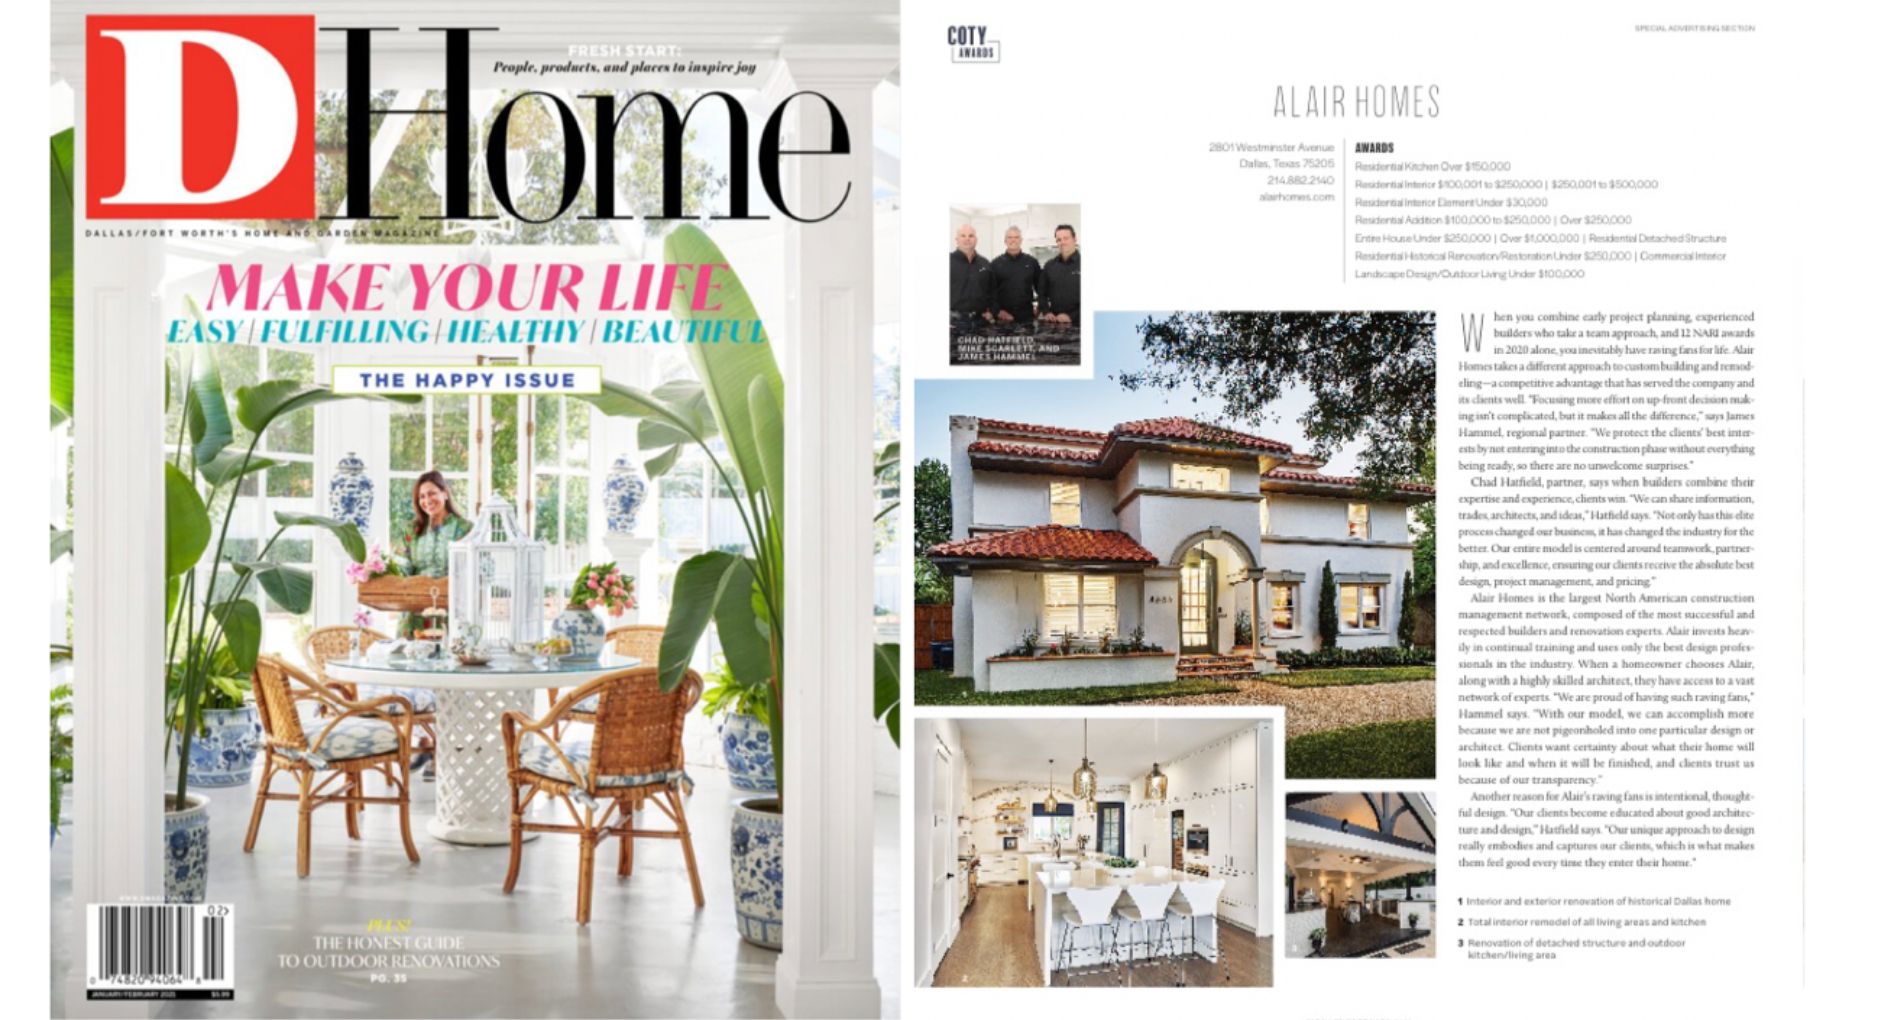 DHome: Alair Homes feature 